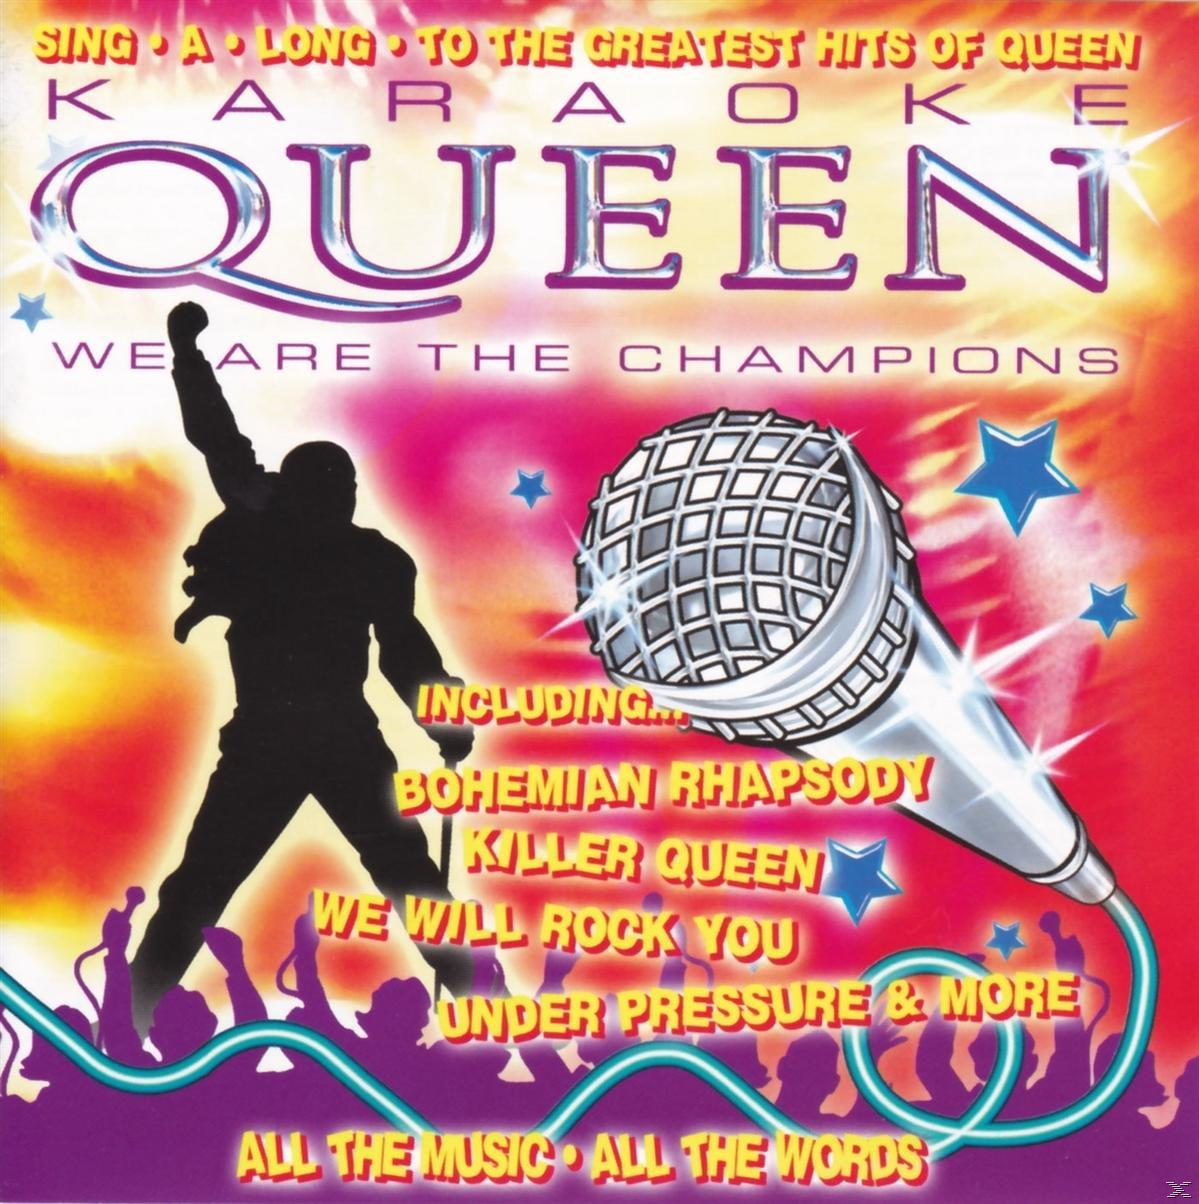 Queen - Queen Champions Are - - We (CD) The